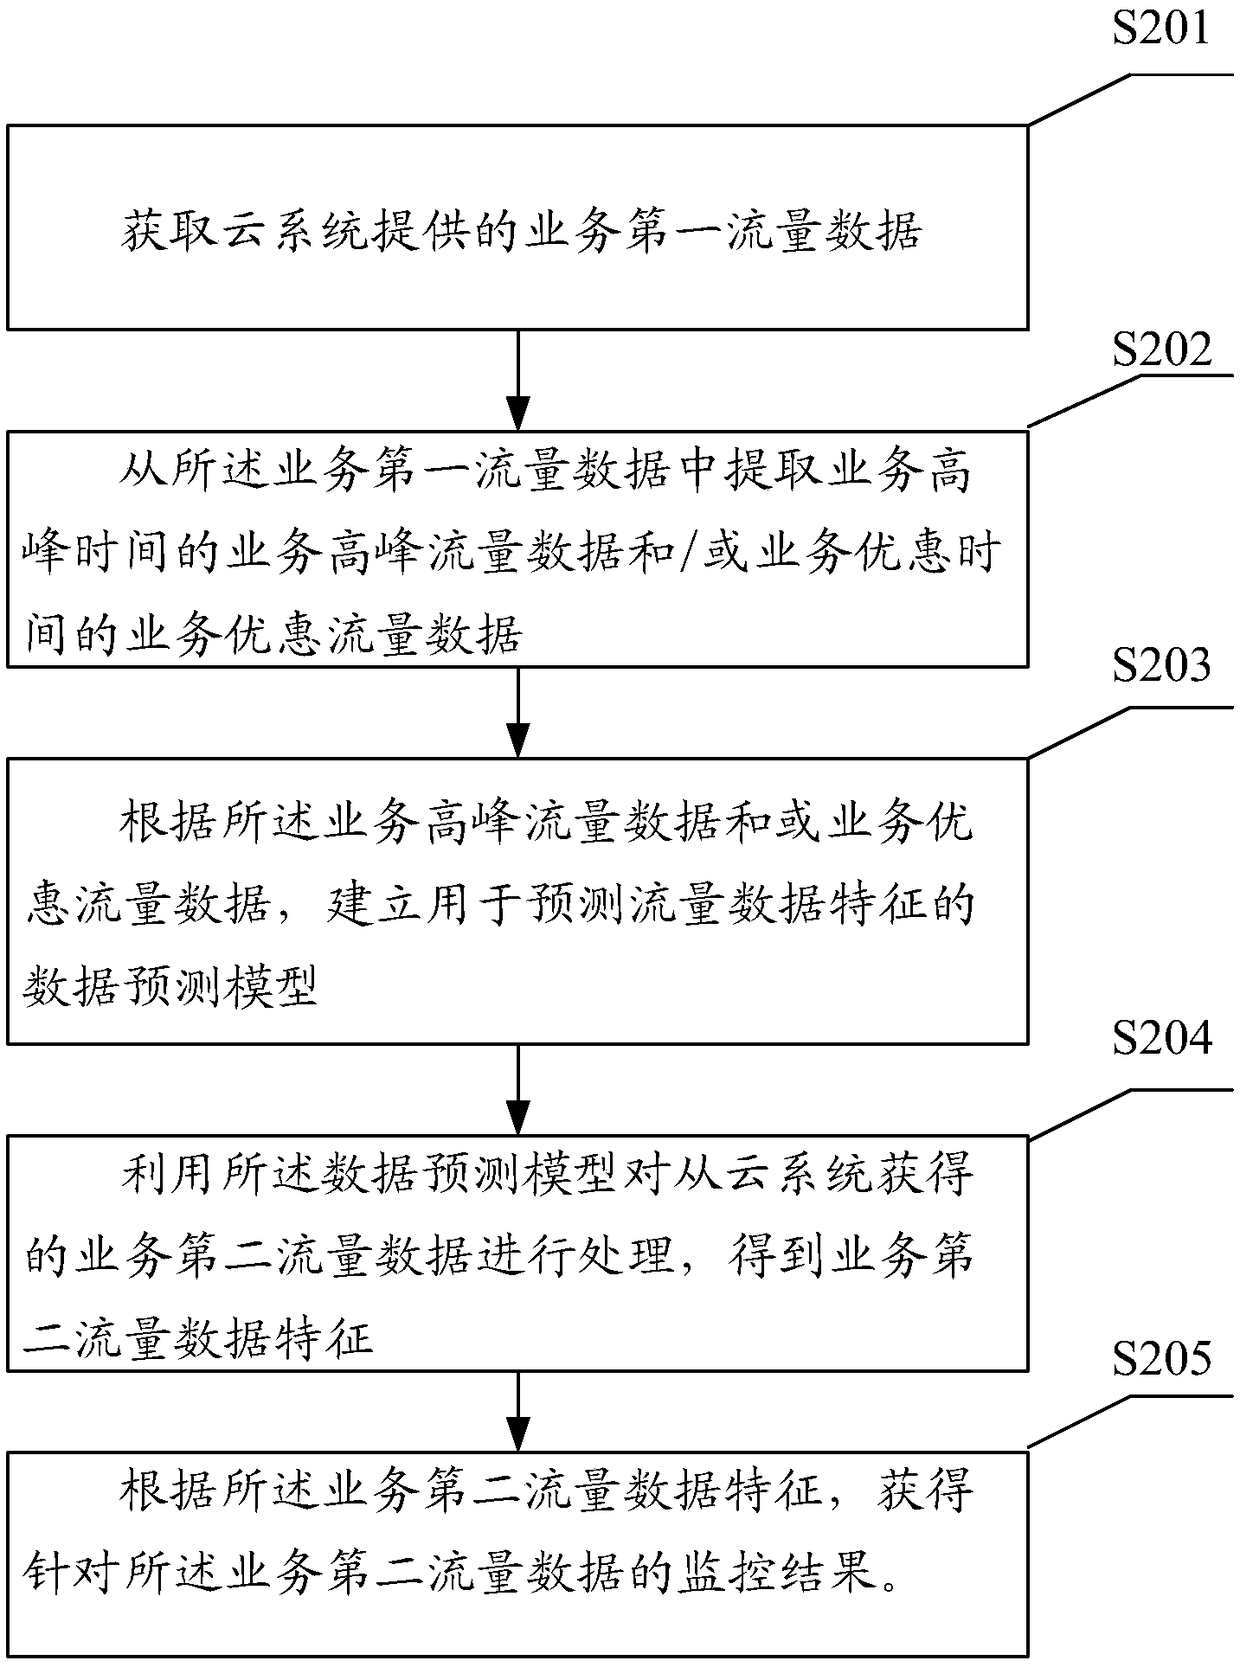 Cloud monitoring system and method